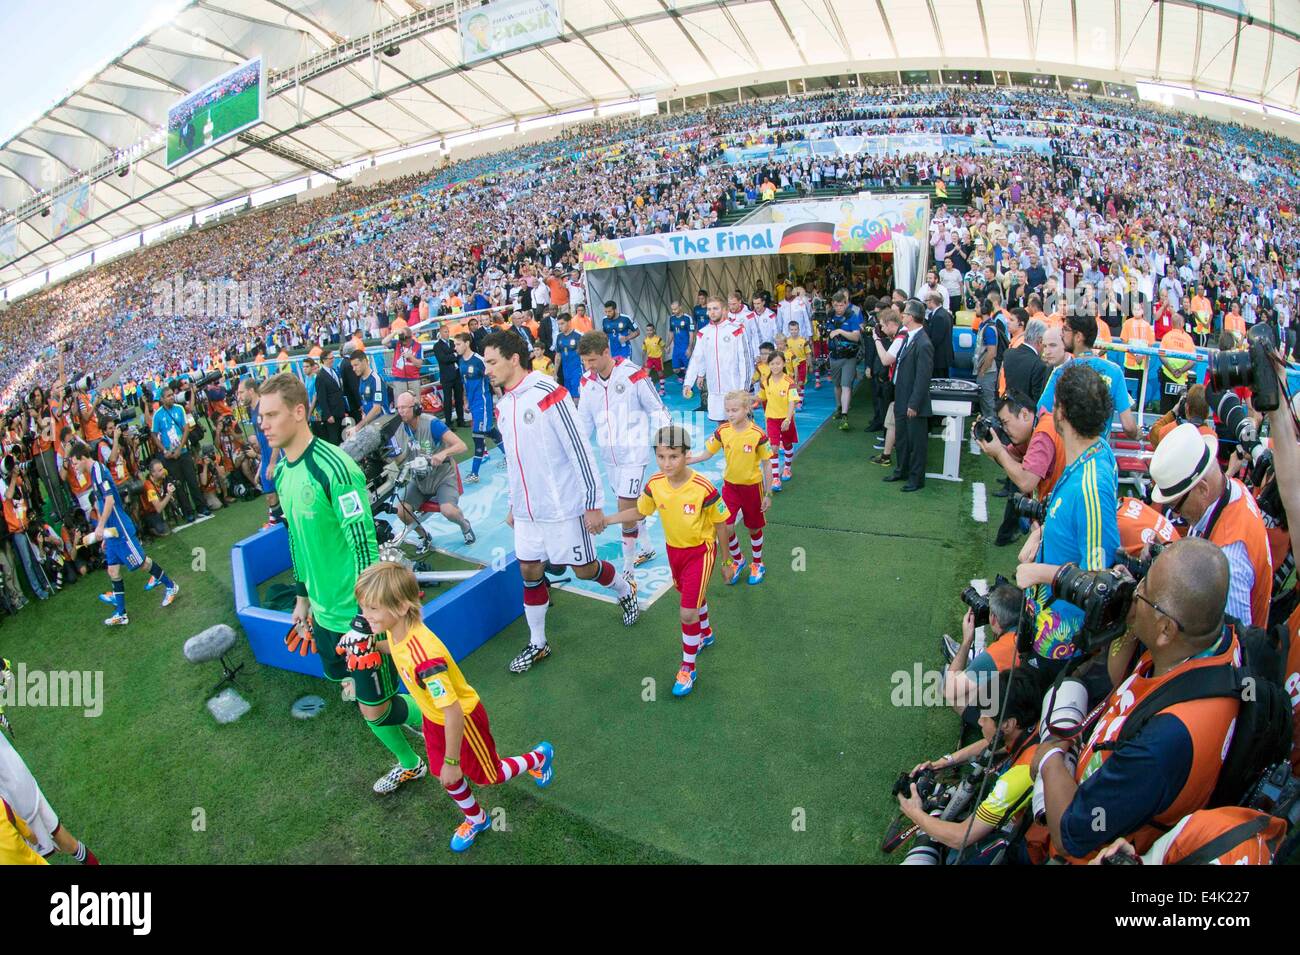 Rio de Janeiro, Brazil. 13th July, 2014. Two team group Football/Soccer : FIFA World Cup Brazil 2014 Final match between Germany 1-0 Argentina at the Maracana stadium in Rio de Janeiro, Brazil . Credit:  Maurizio Borsari/AFLO/Alamy Live News Stock Photo